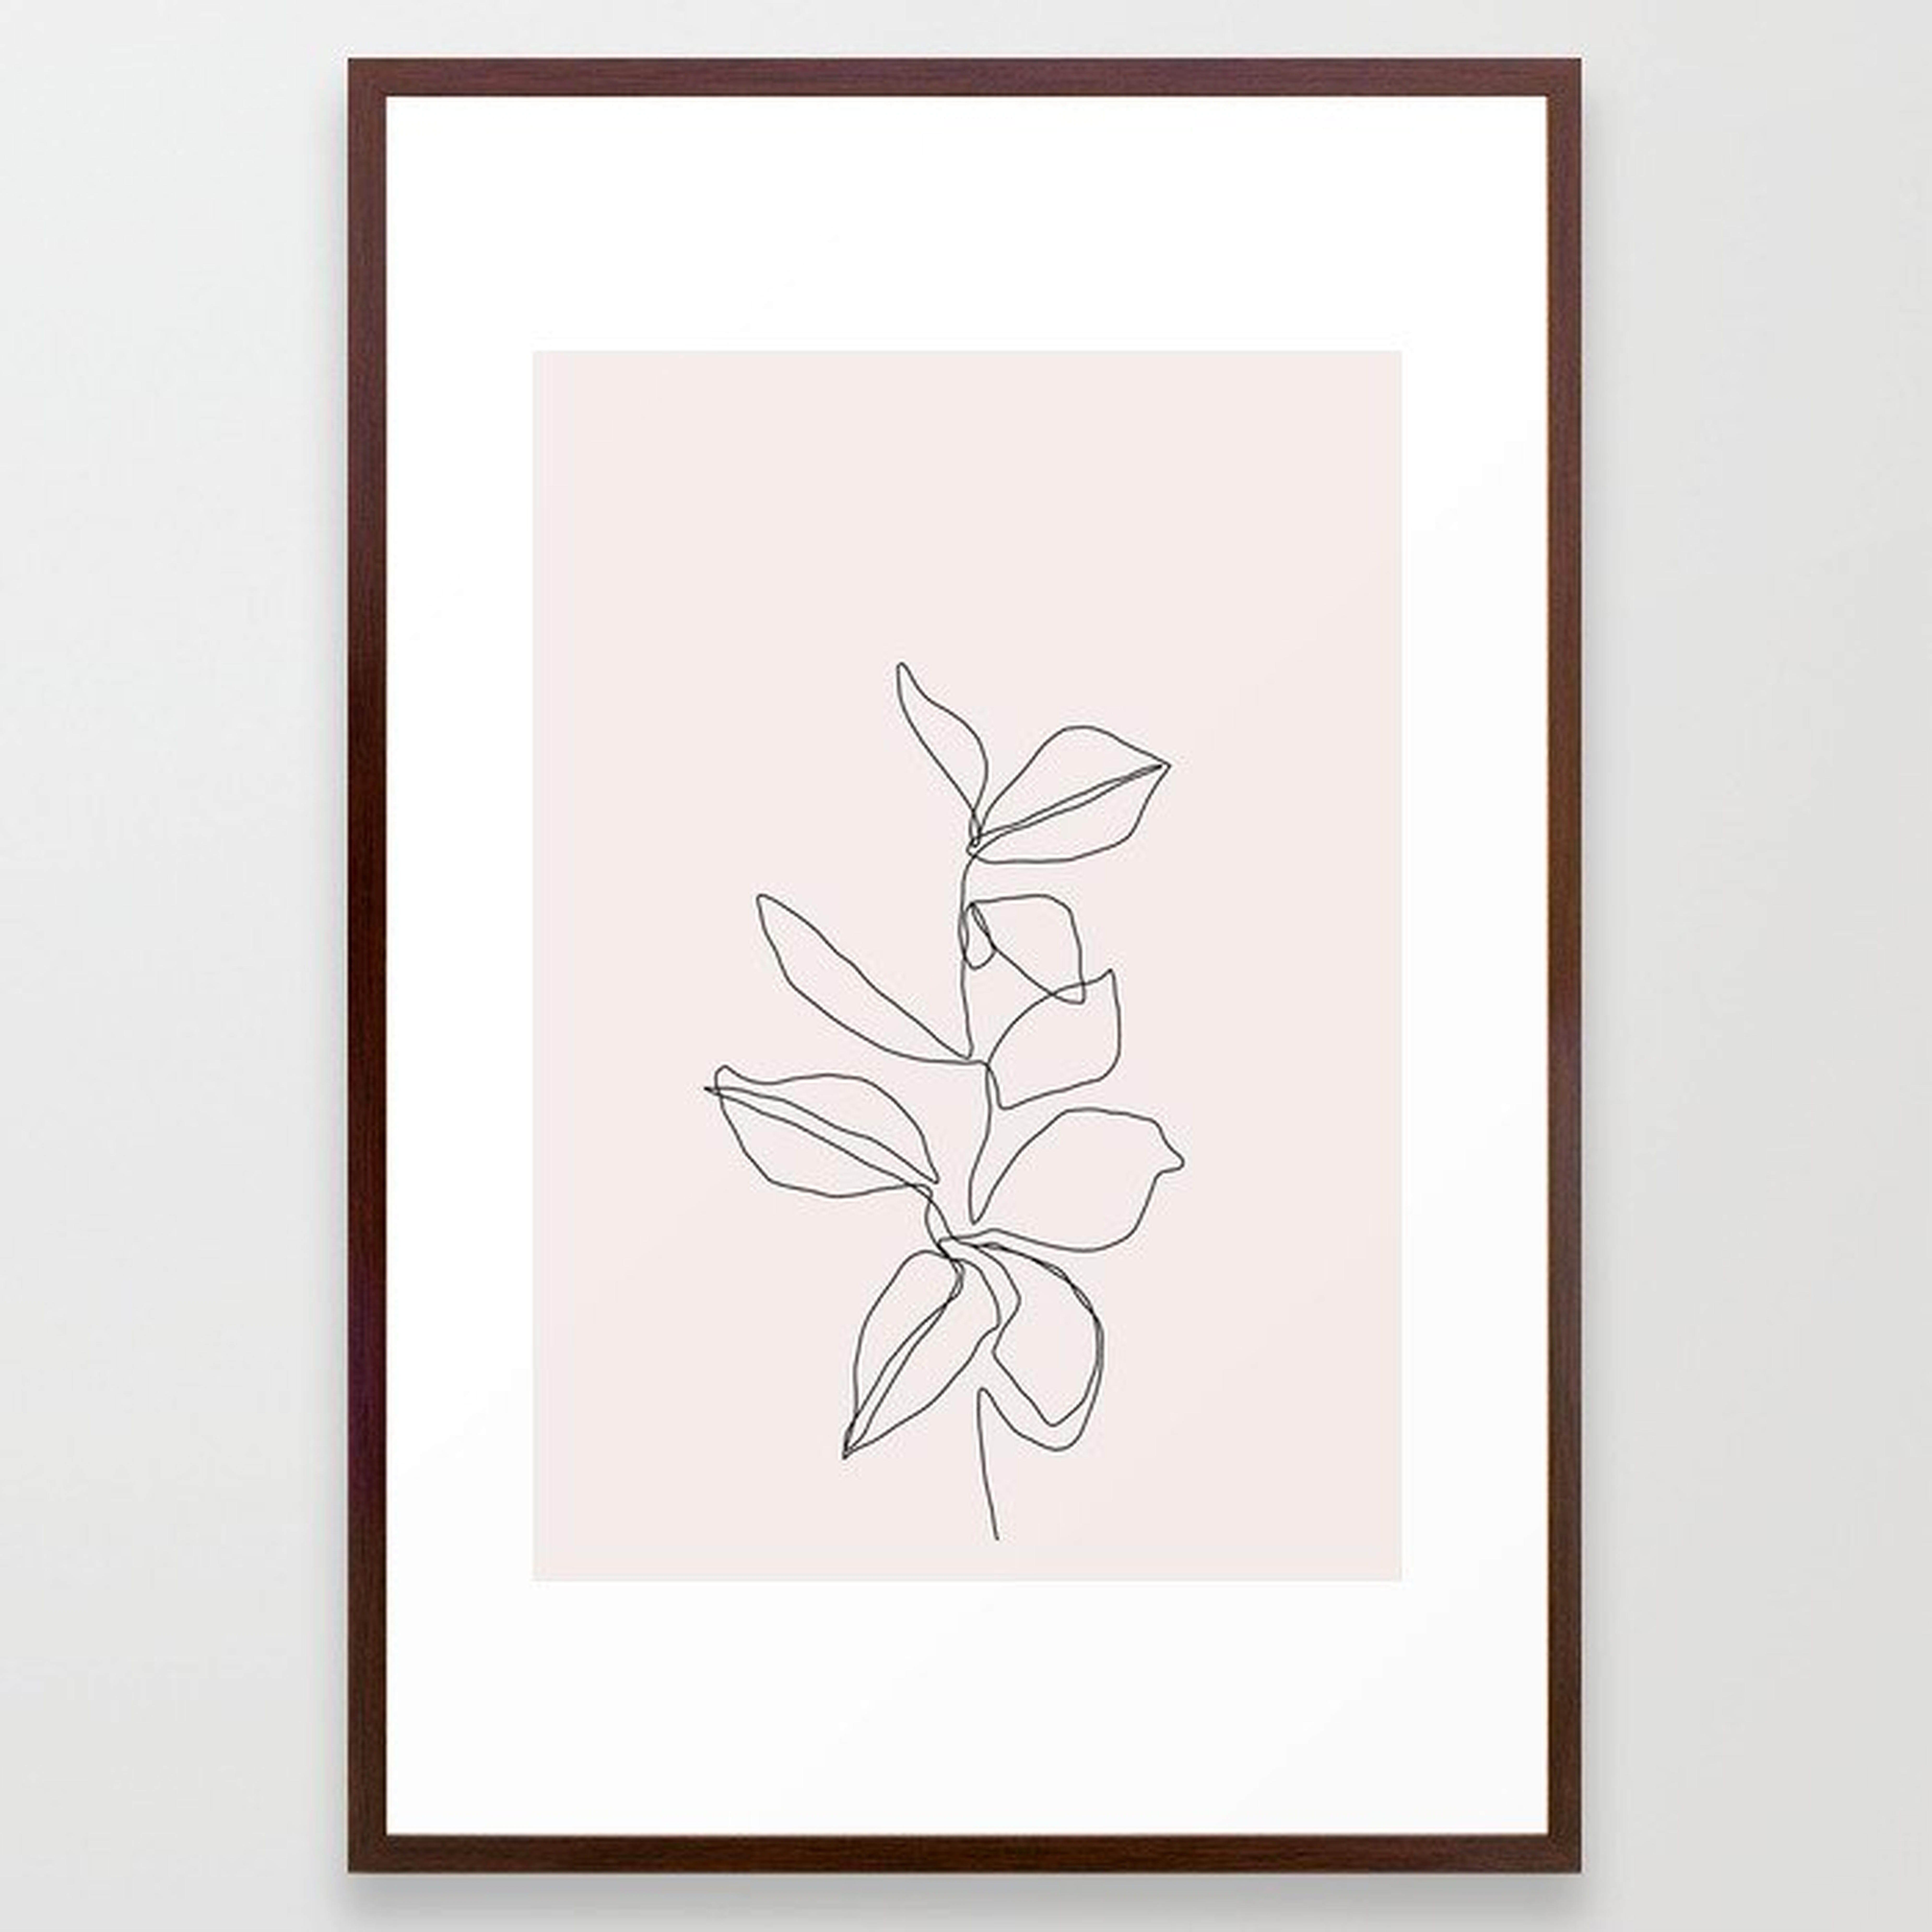 Botanical Illustration Line Drawing - Birdie I Framed Art Print by The Colour Study - Conservation Walnut - LARGE (Gallery)-26x38 - Society6